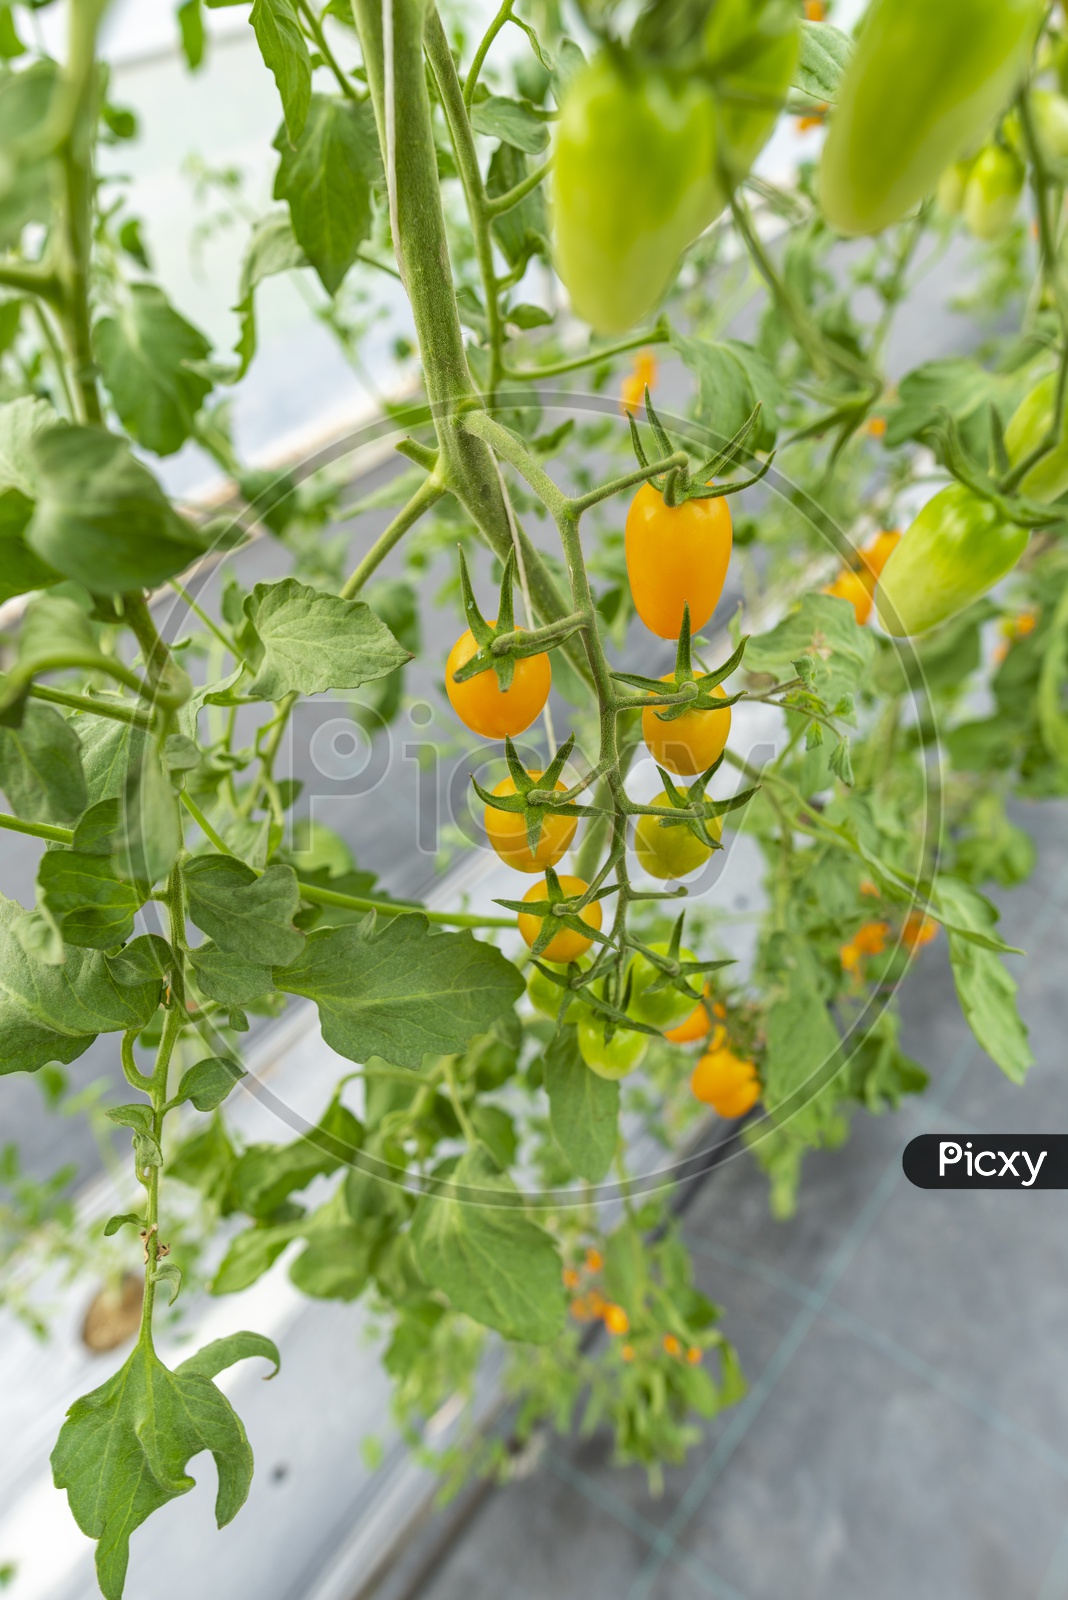 Tomato Cultivation In Greenhouses , Tomatoes Grown In House of Modern Agricultural Technology Systems